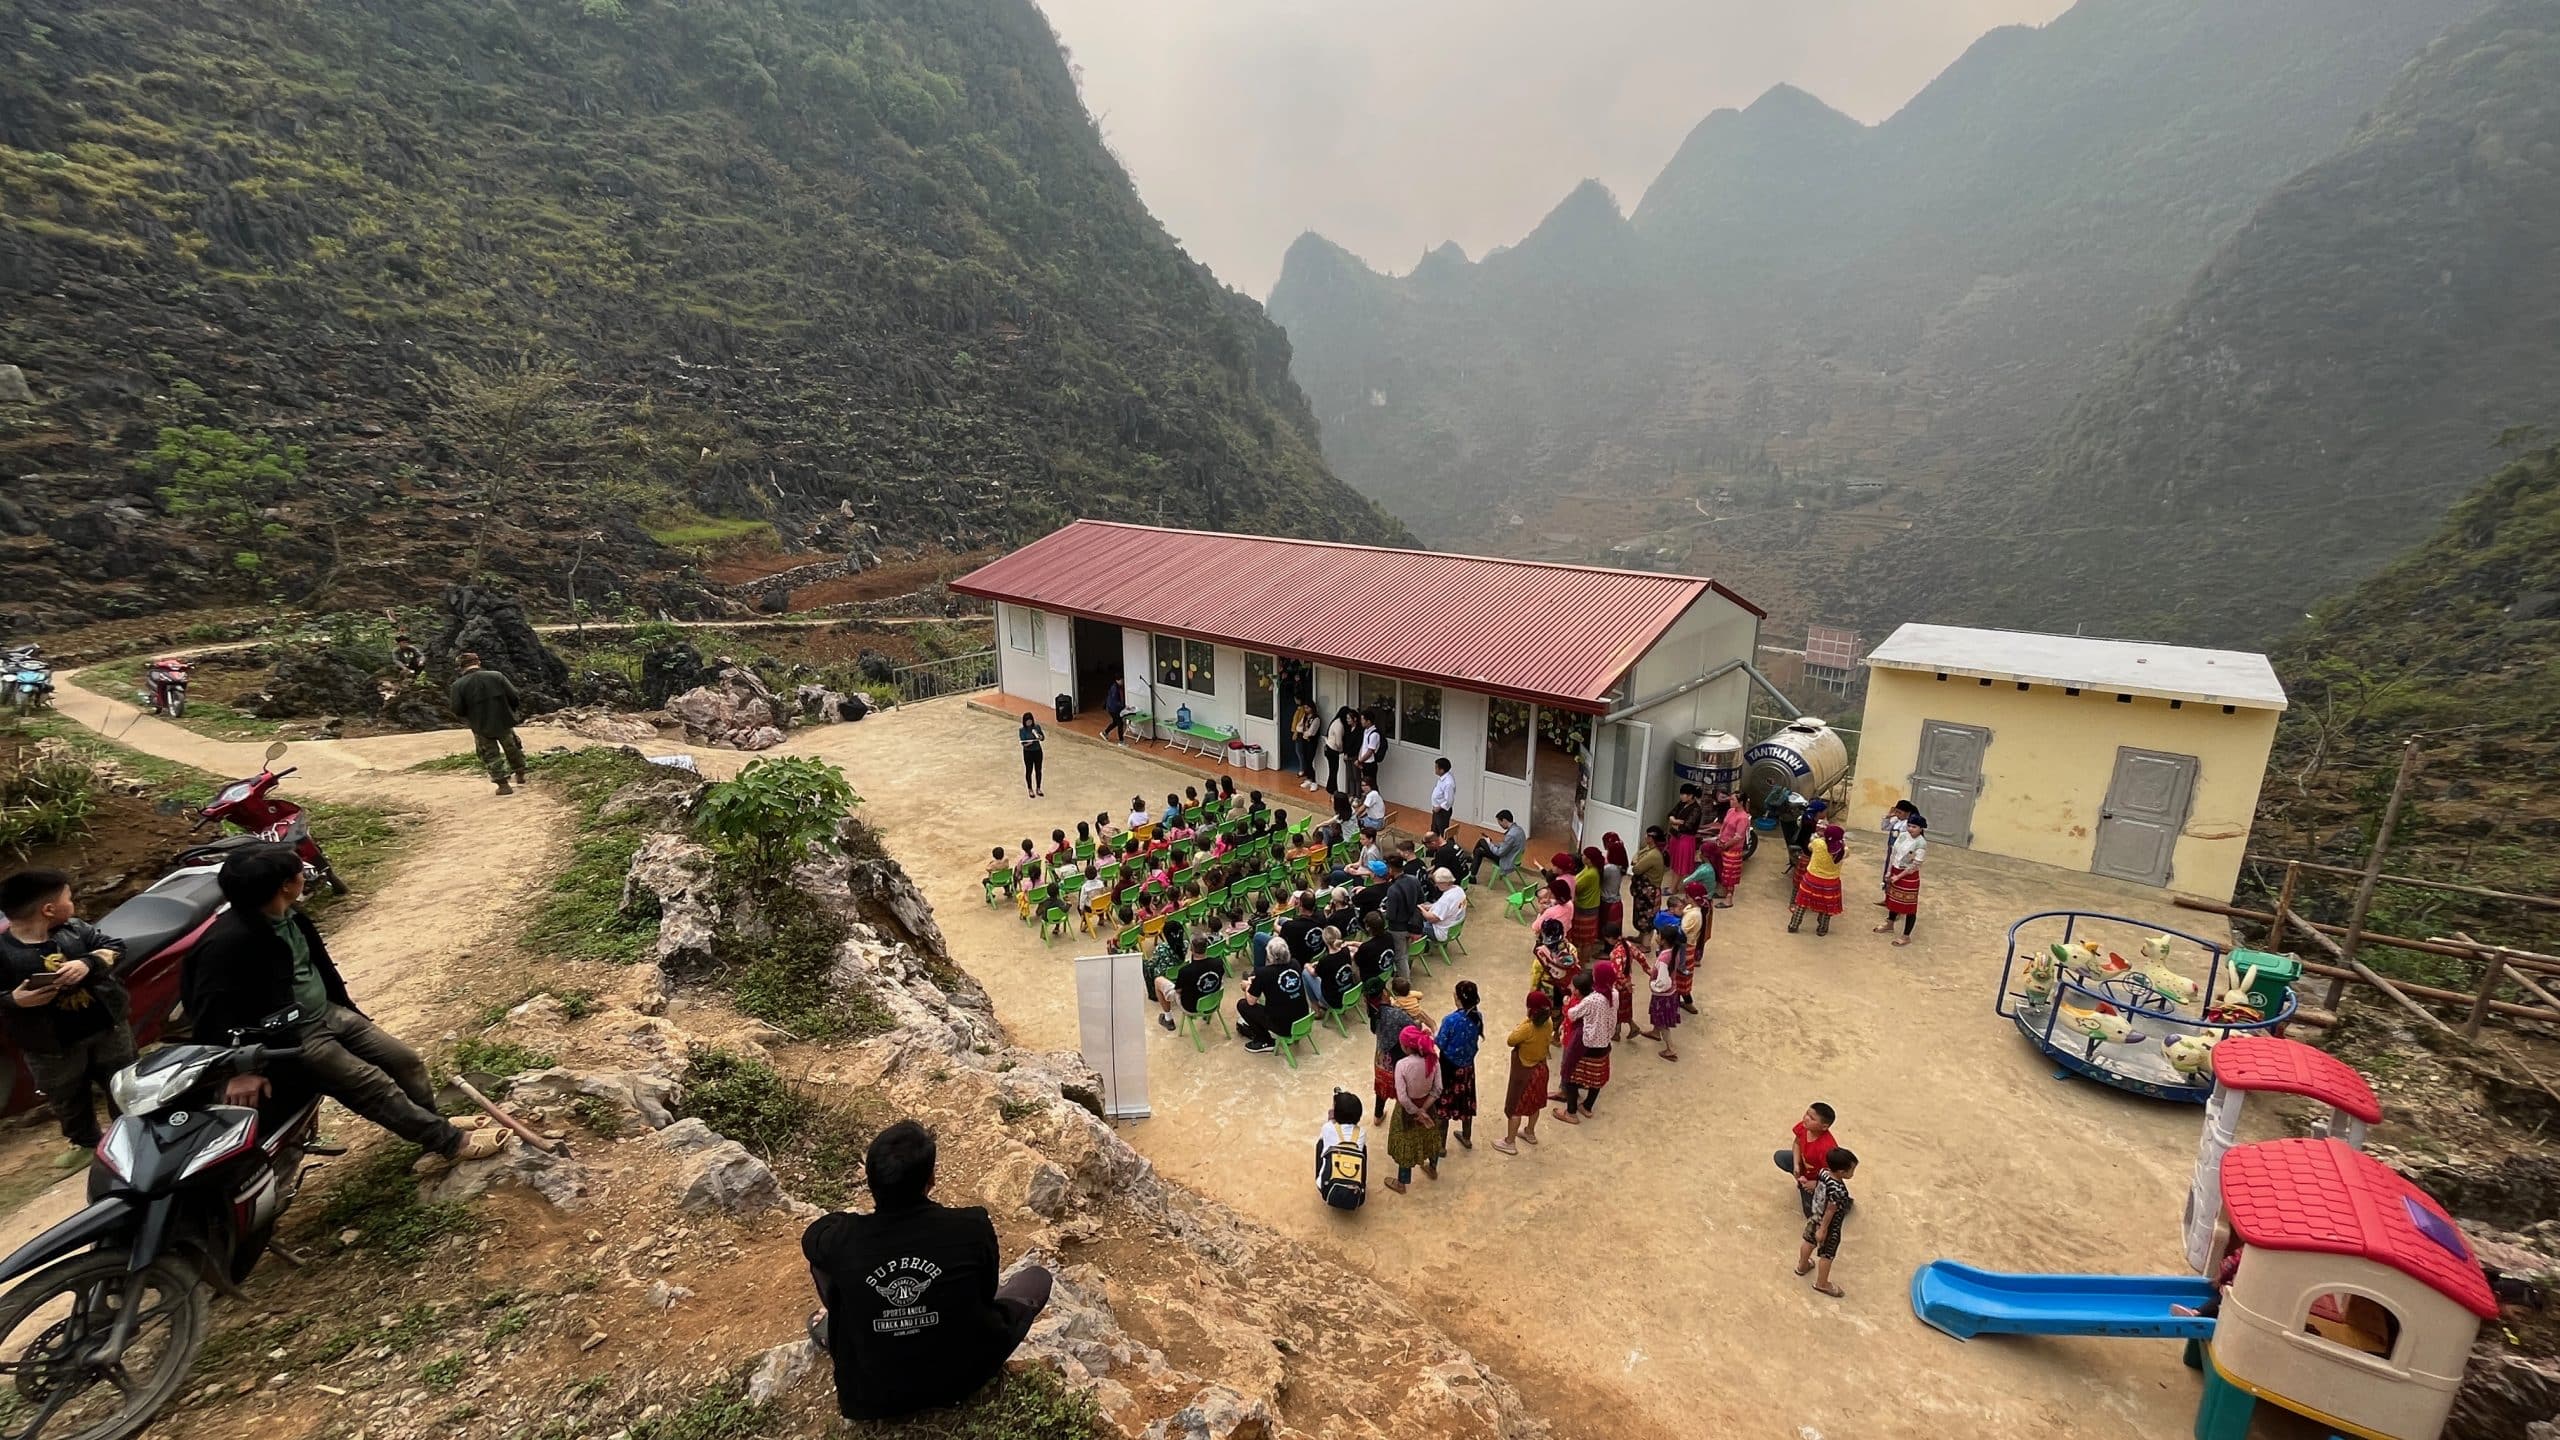 Remote shool that the Rally supported Ha Giang in 2023